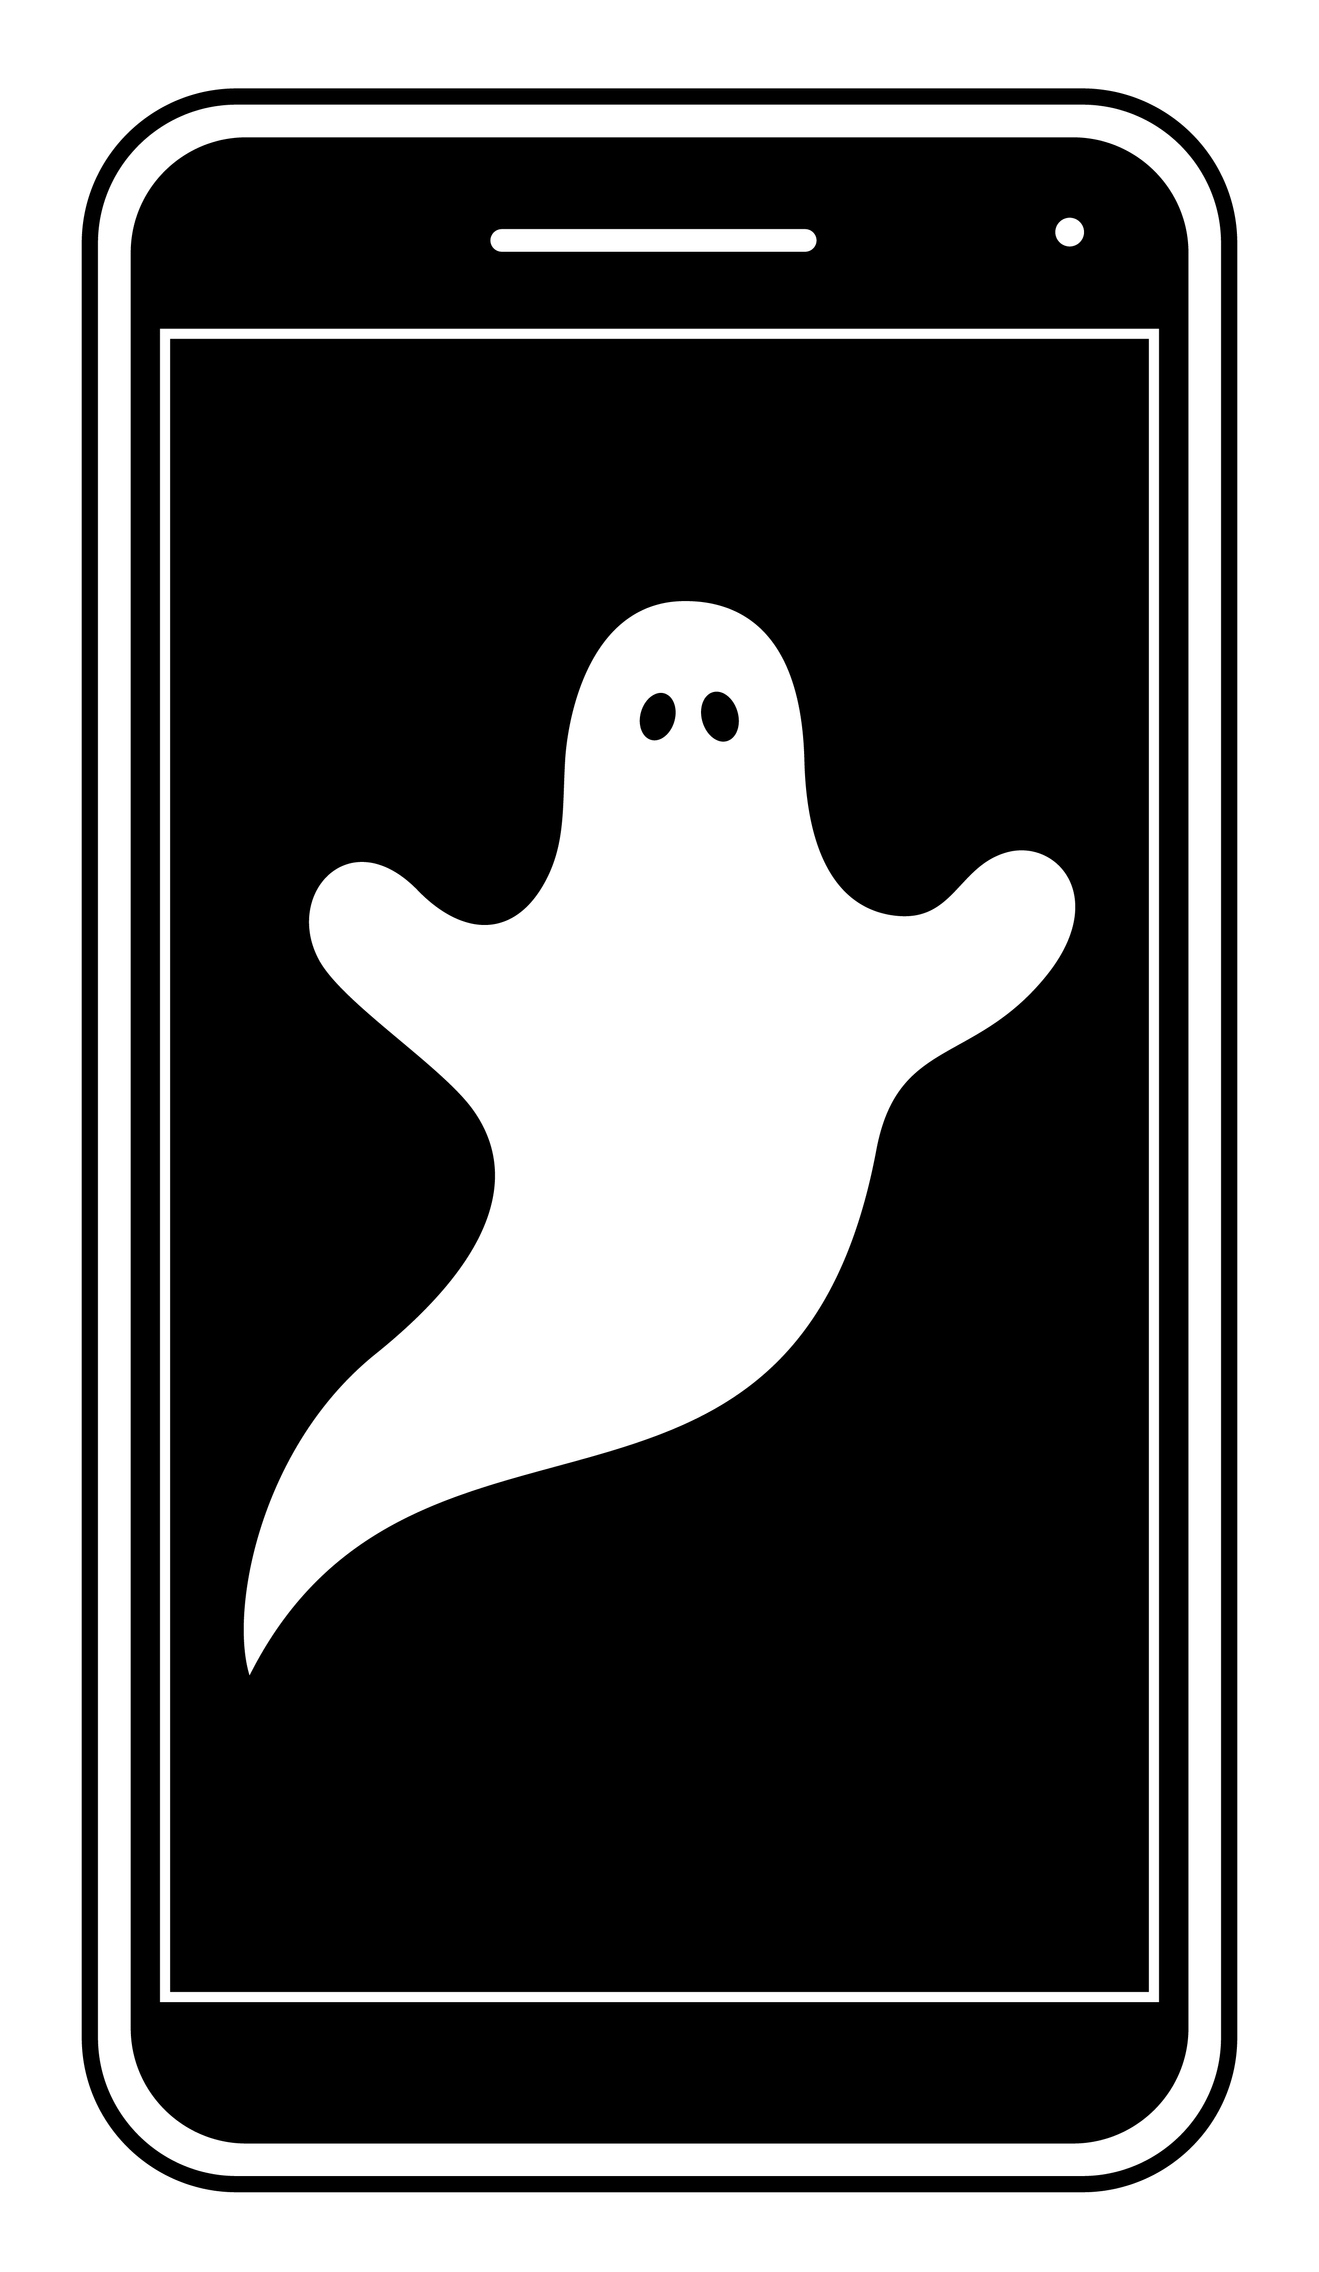 A ghost on a phone